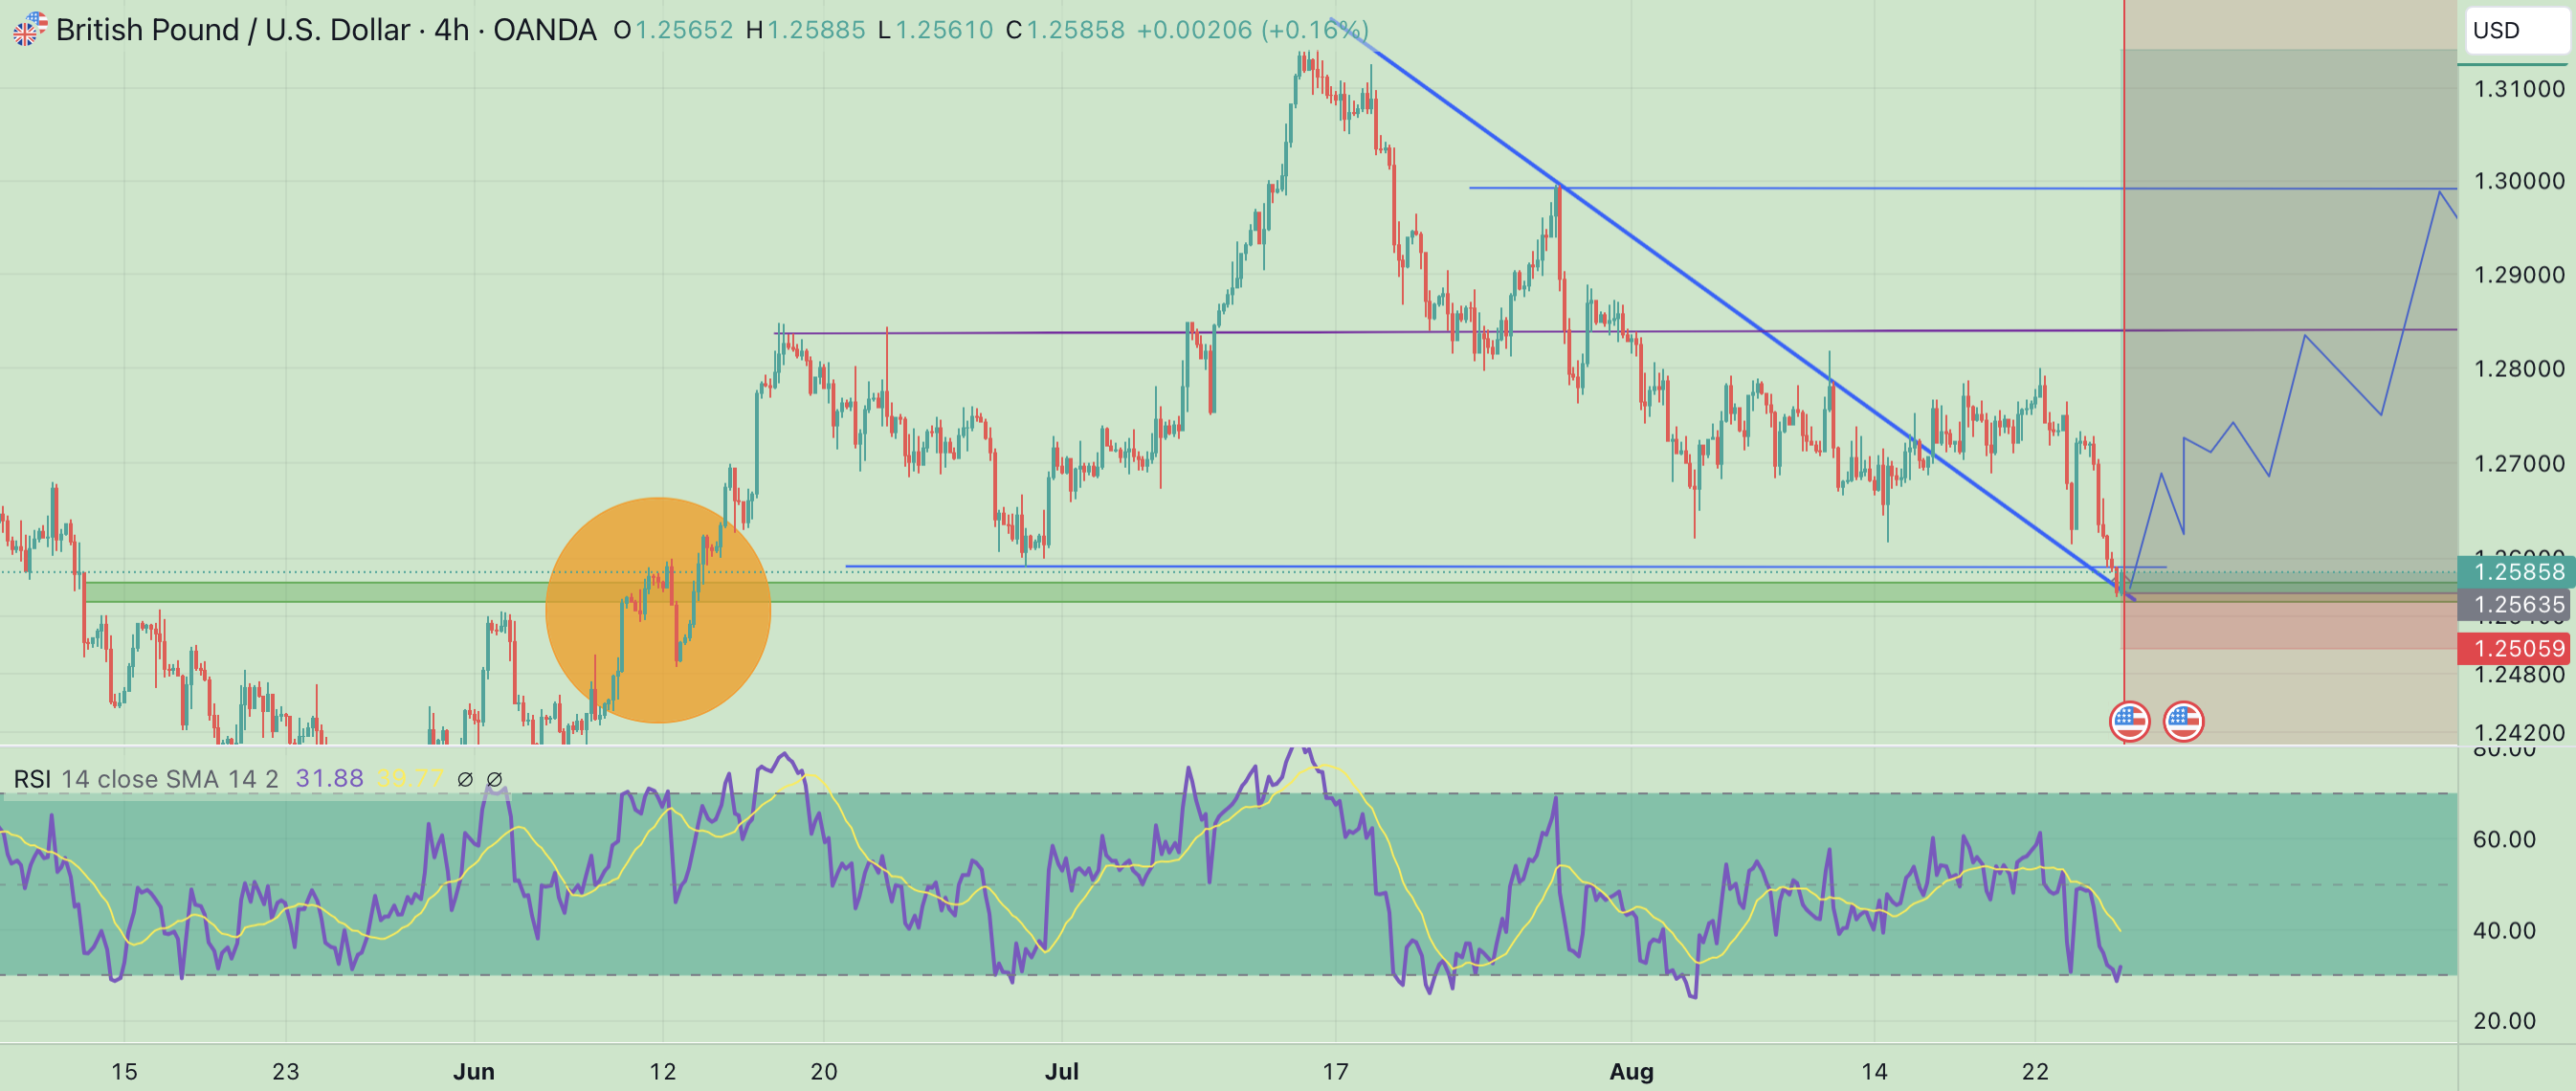 Let us moon on GBPUSD